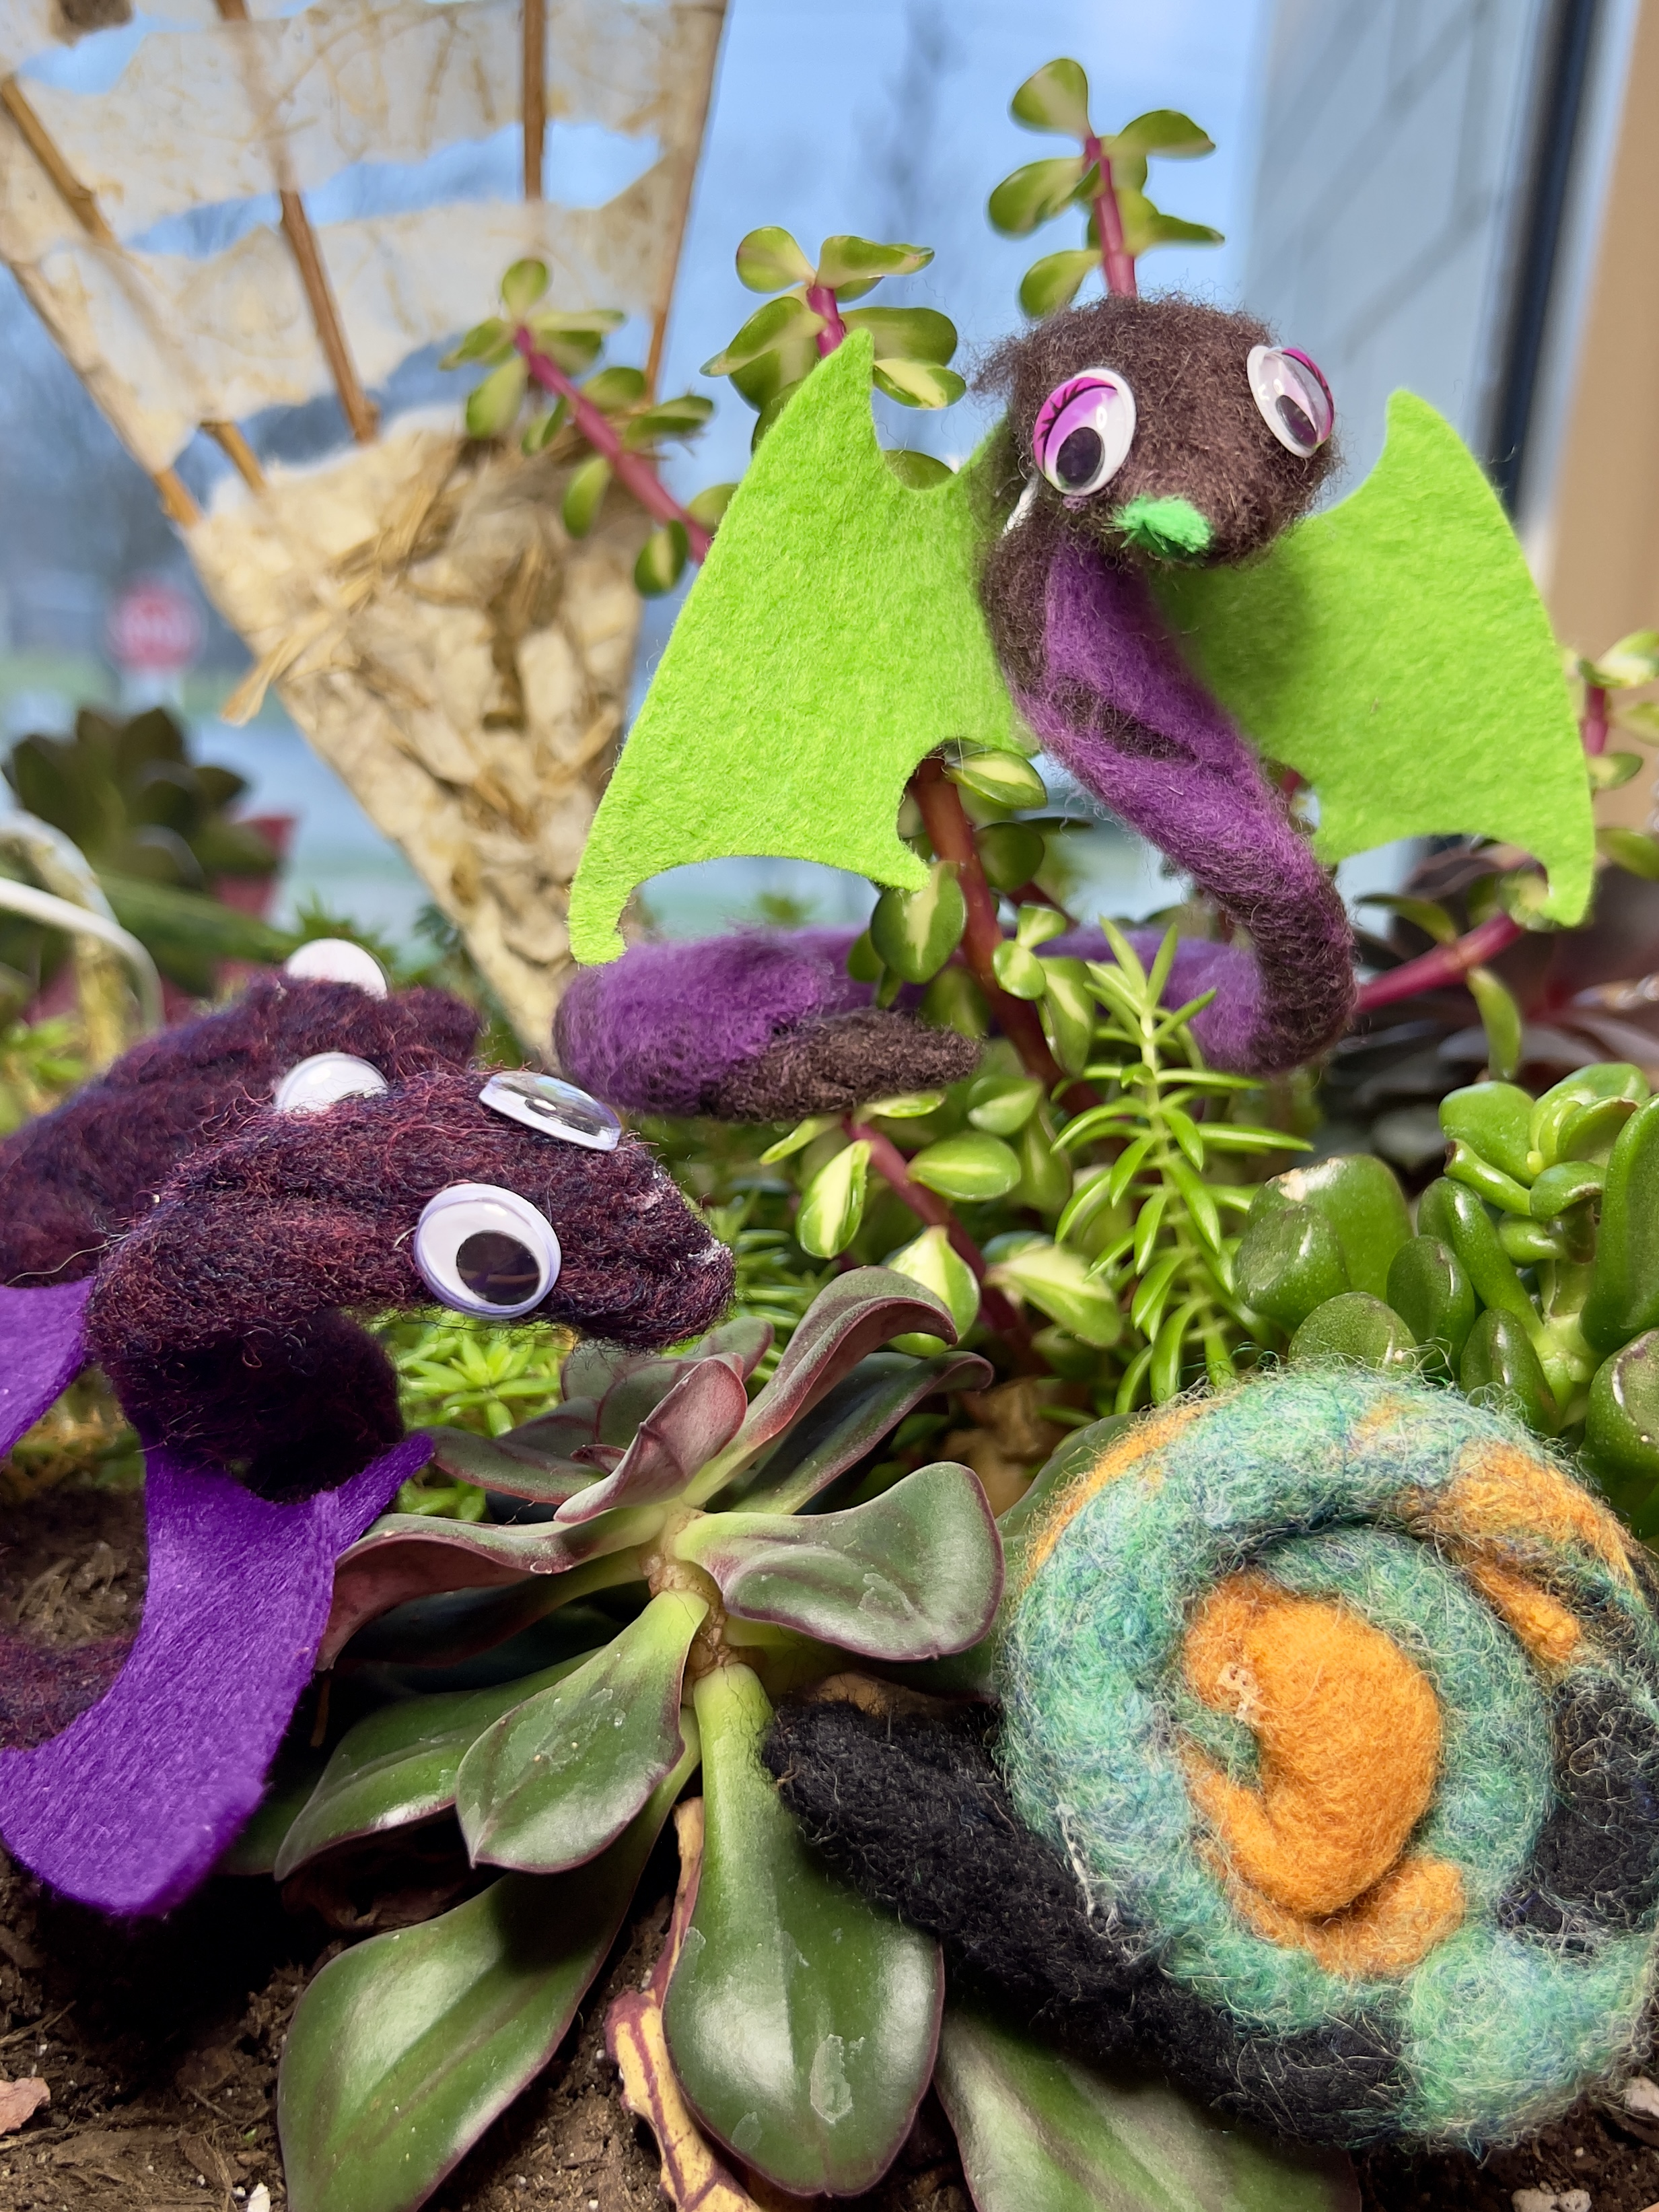 Purple felted snakes with purple and green wings and a green gold and black felted snail all sitting on plants